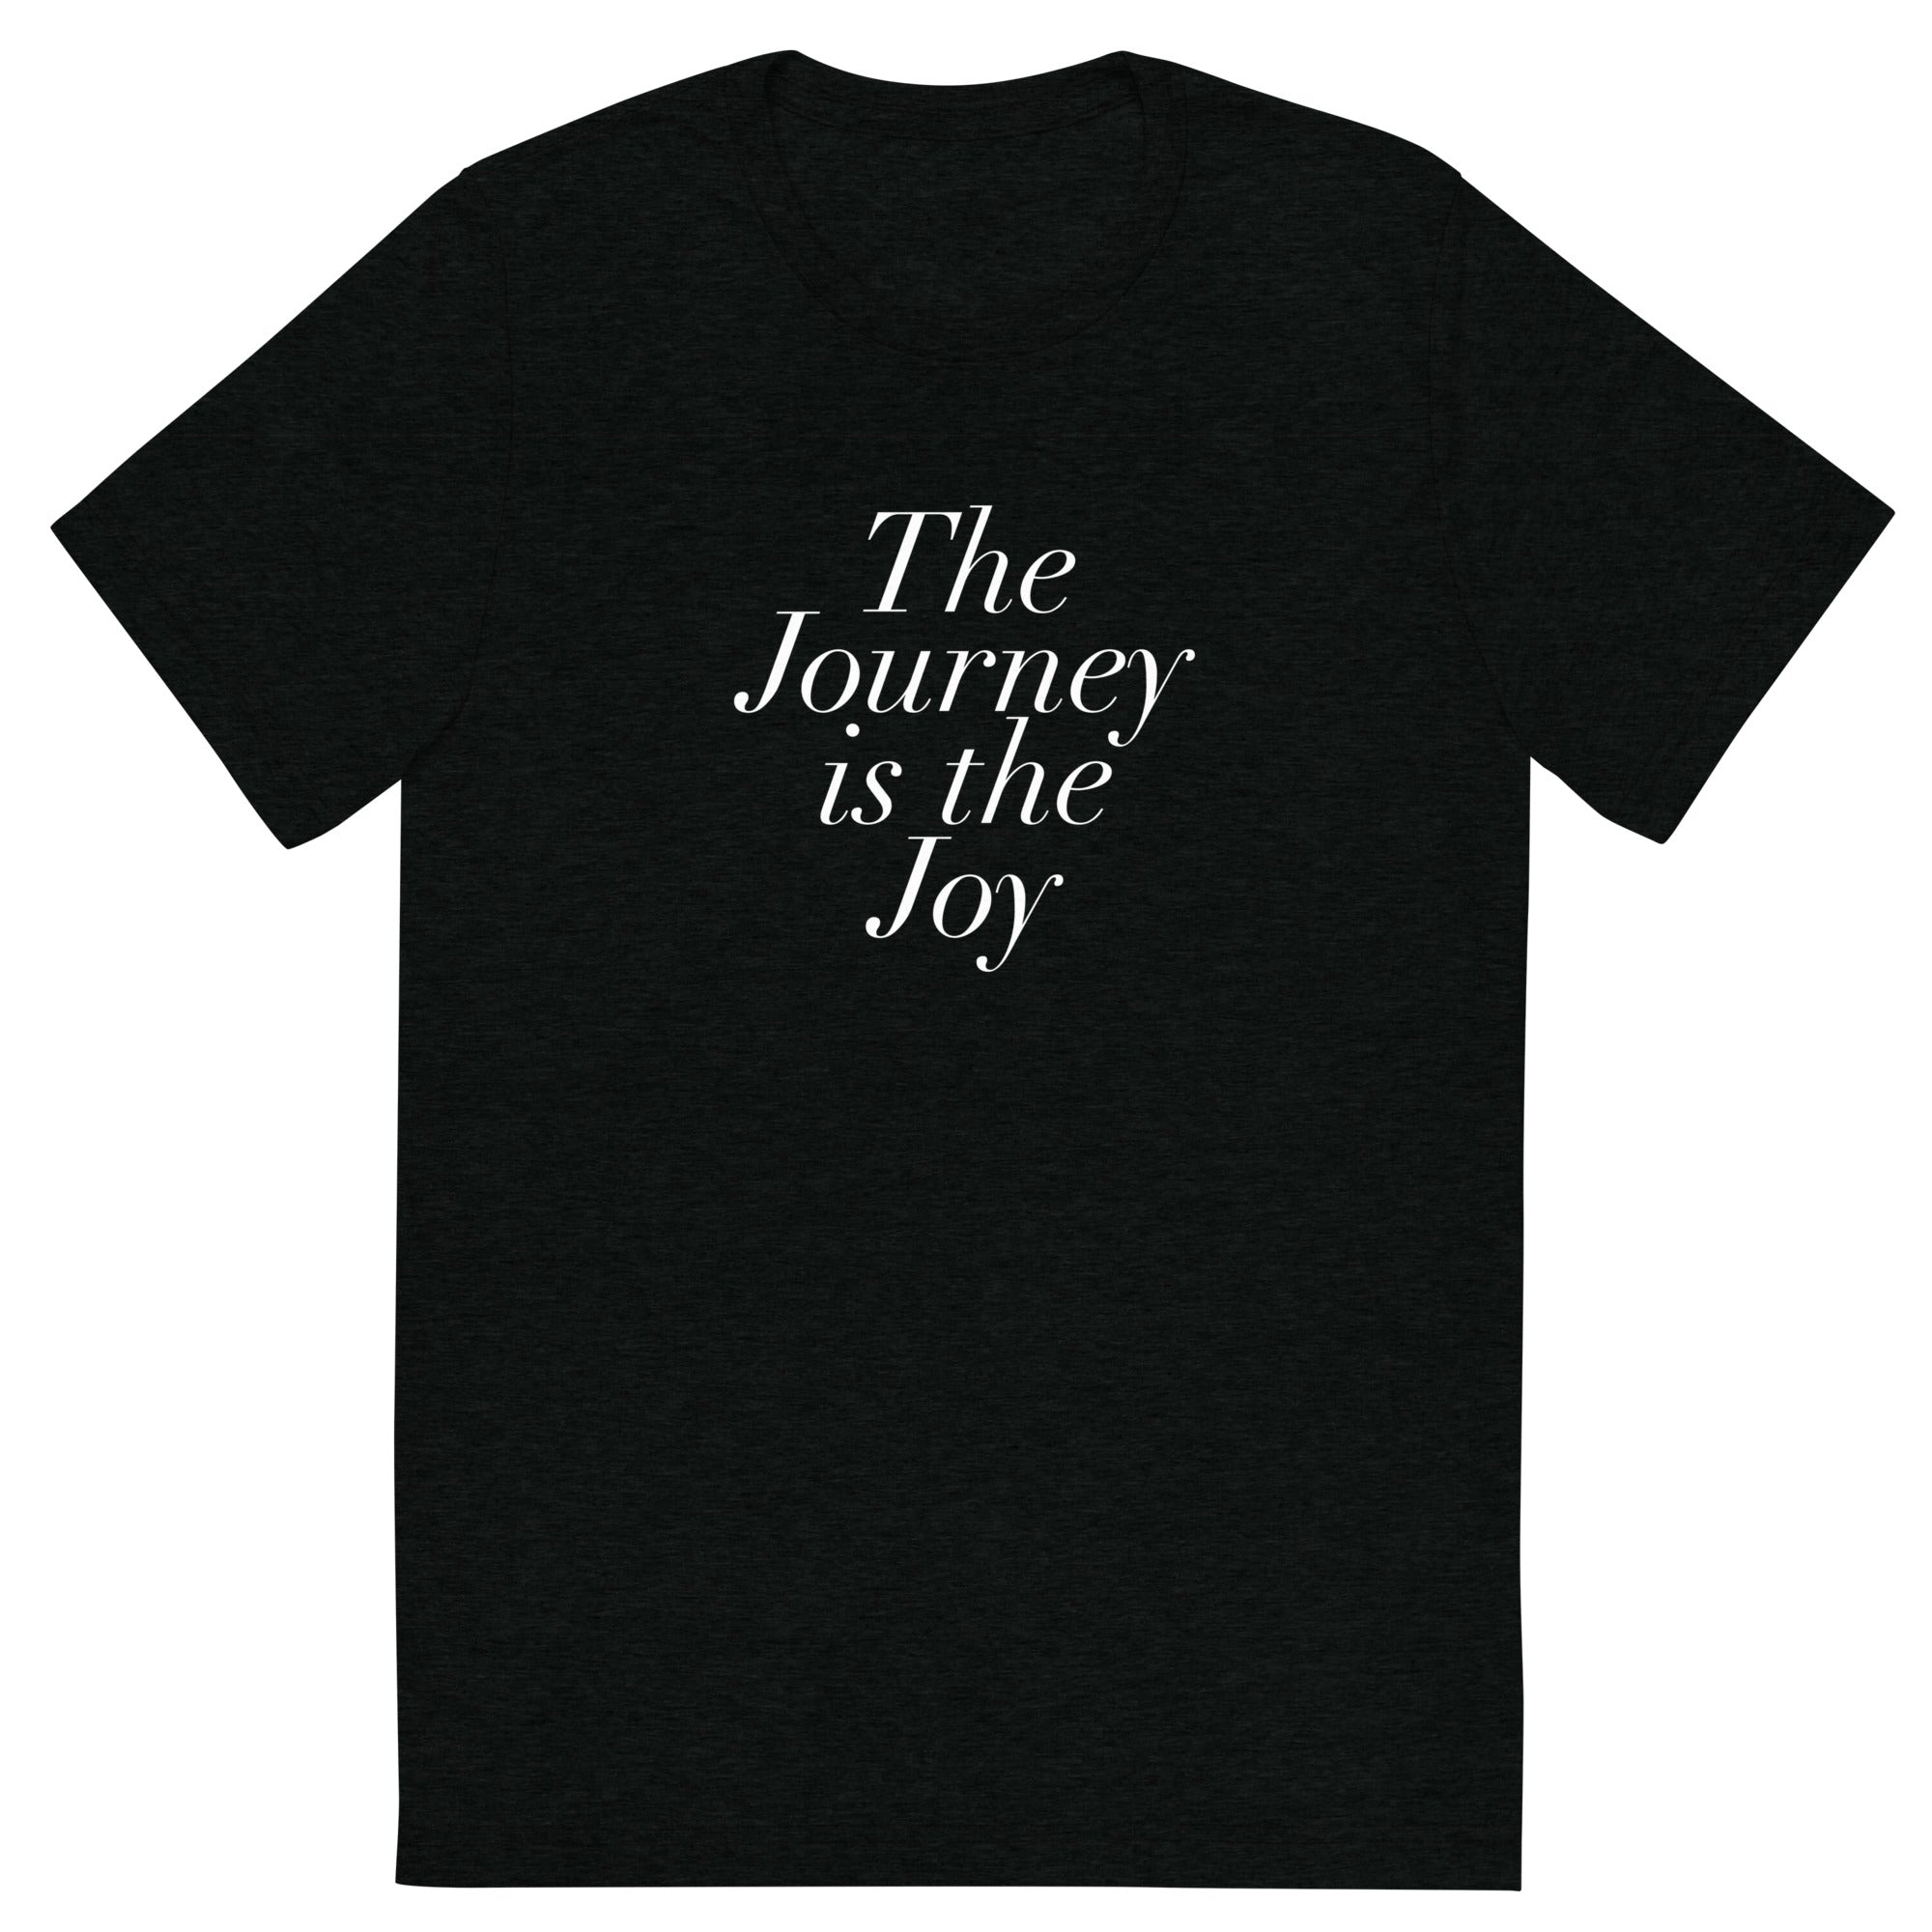 The Journey is the Joy - Unisex Short sleeve t-shirt in Black, Maroon, Berry, Grey and Mauve